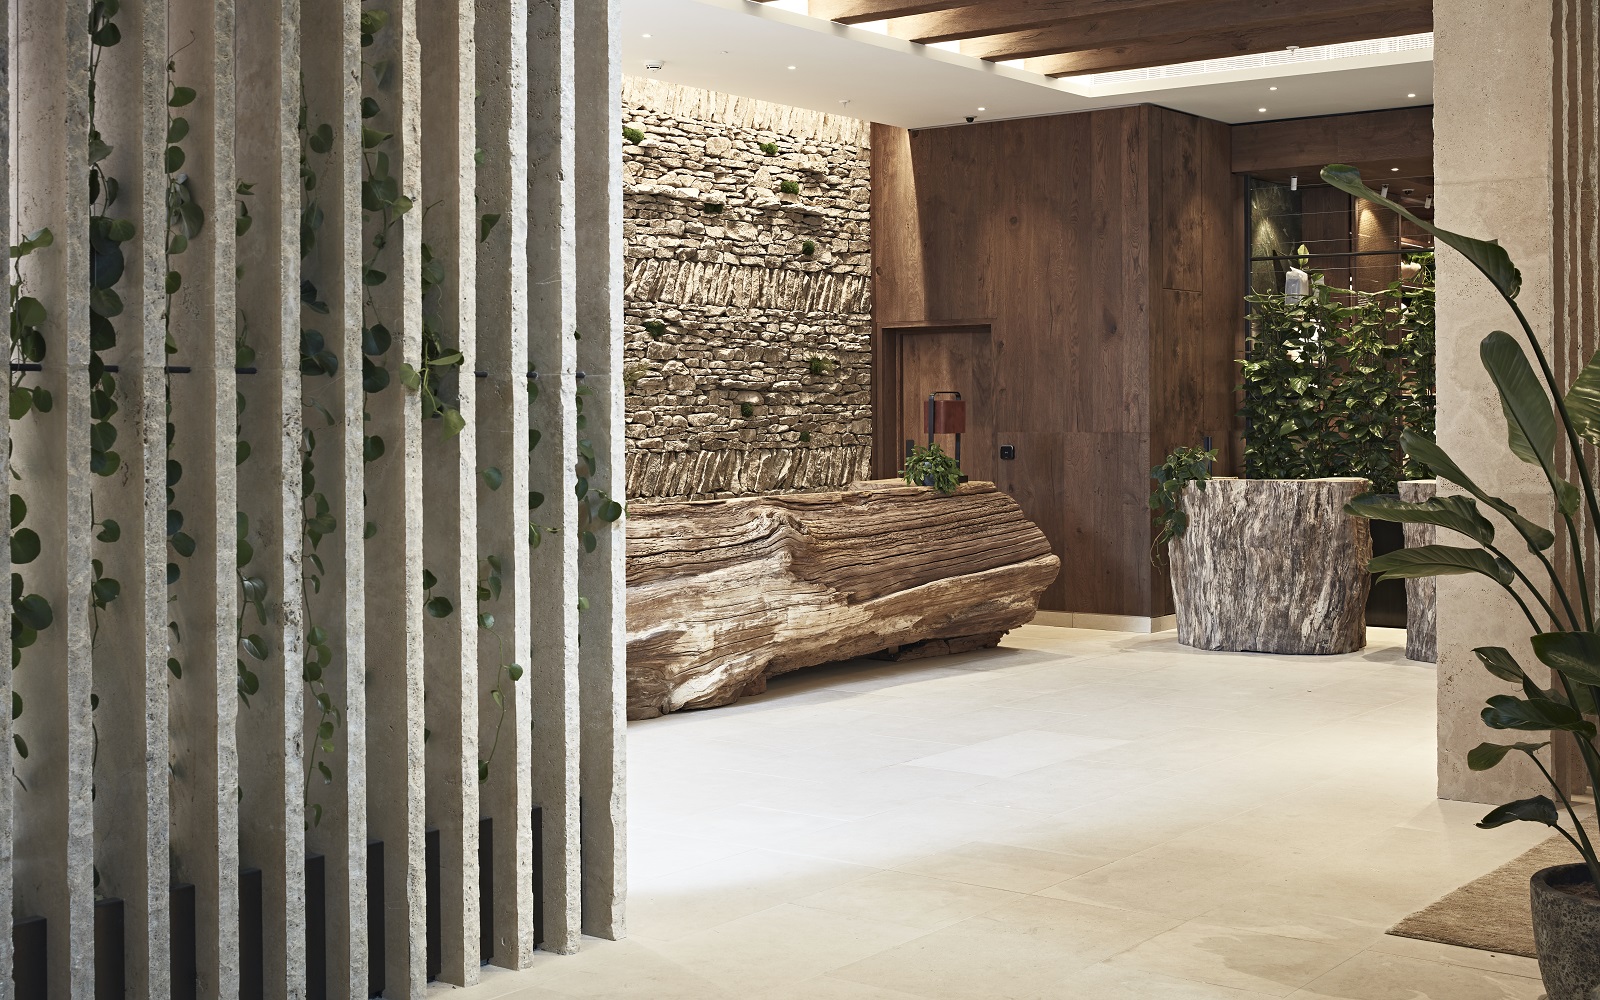 stone, wood and plants in minimalistic setting of 1Hotel Mayfair reception